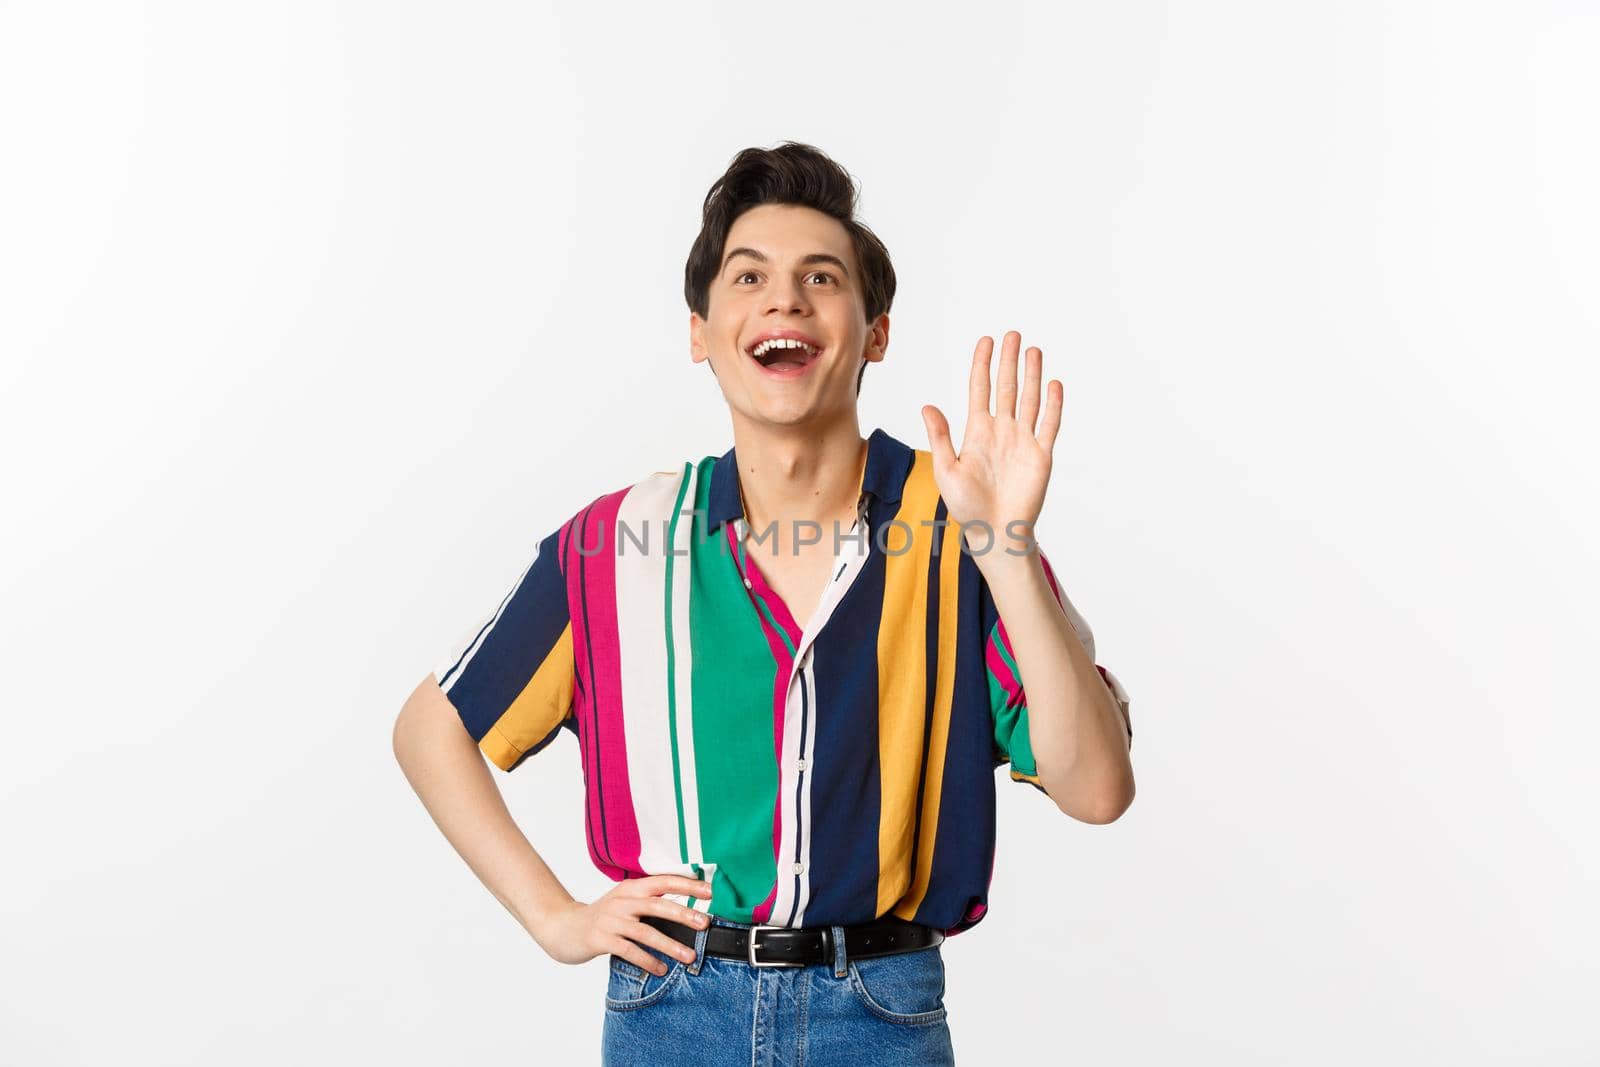 Cheerful gay man saying hello, waving hand and greeting person, standing over white background.